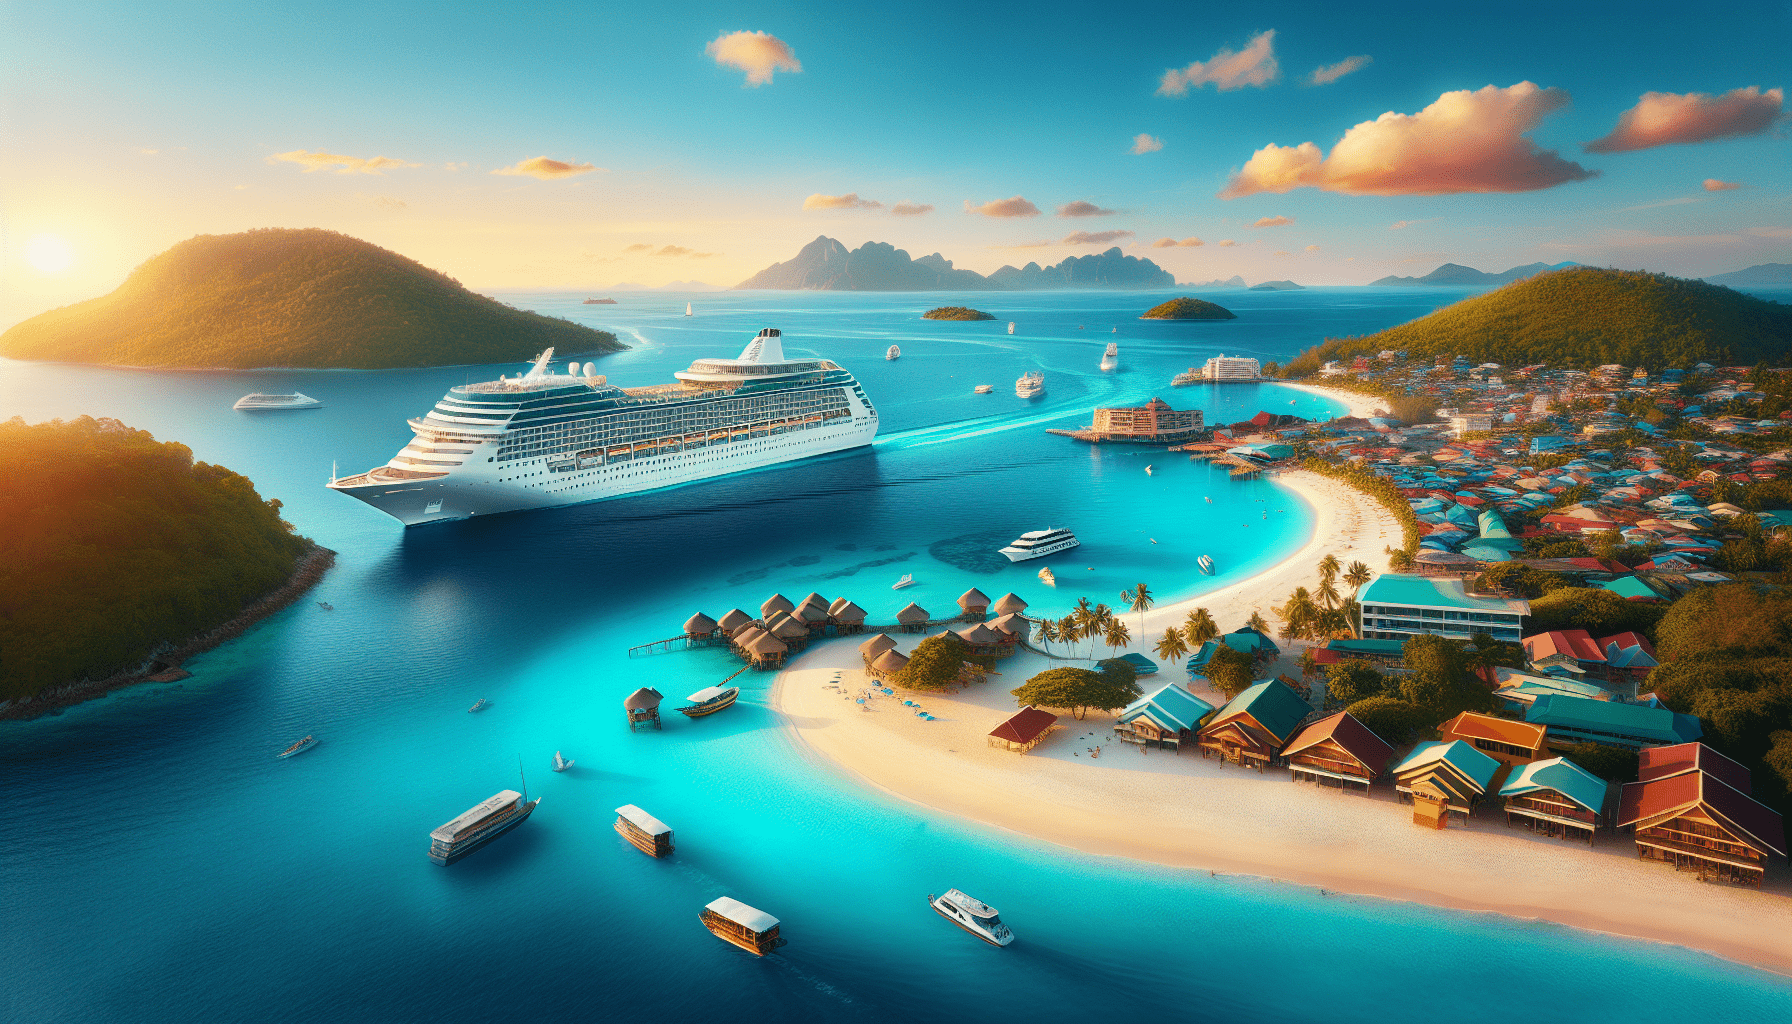 What Is The Most Popular Cruise Destination?